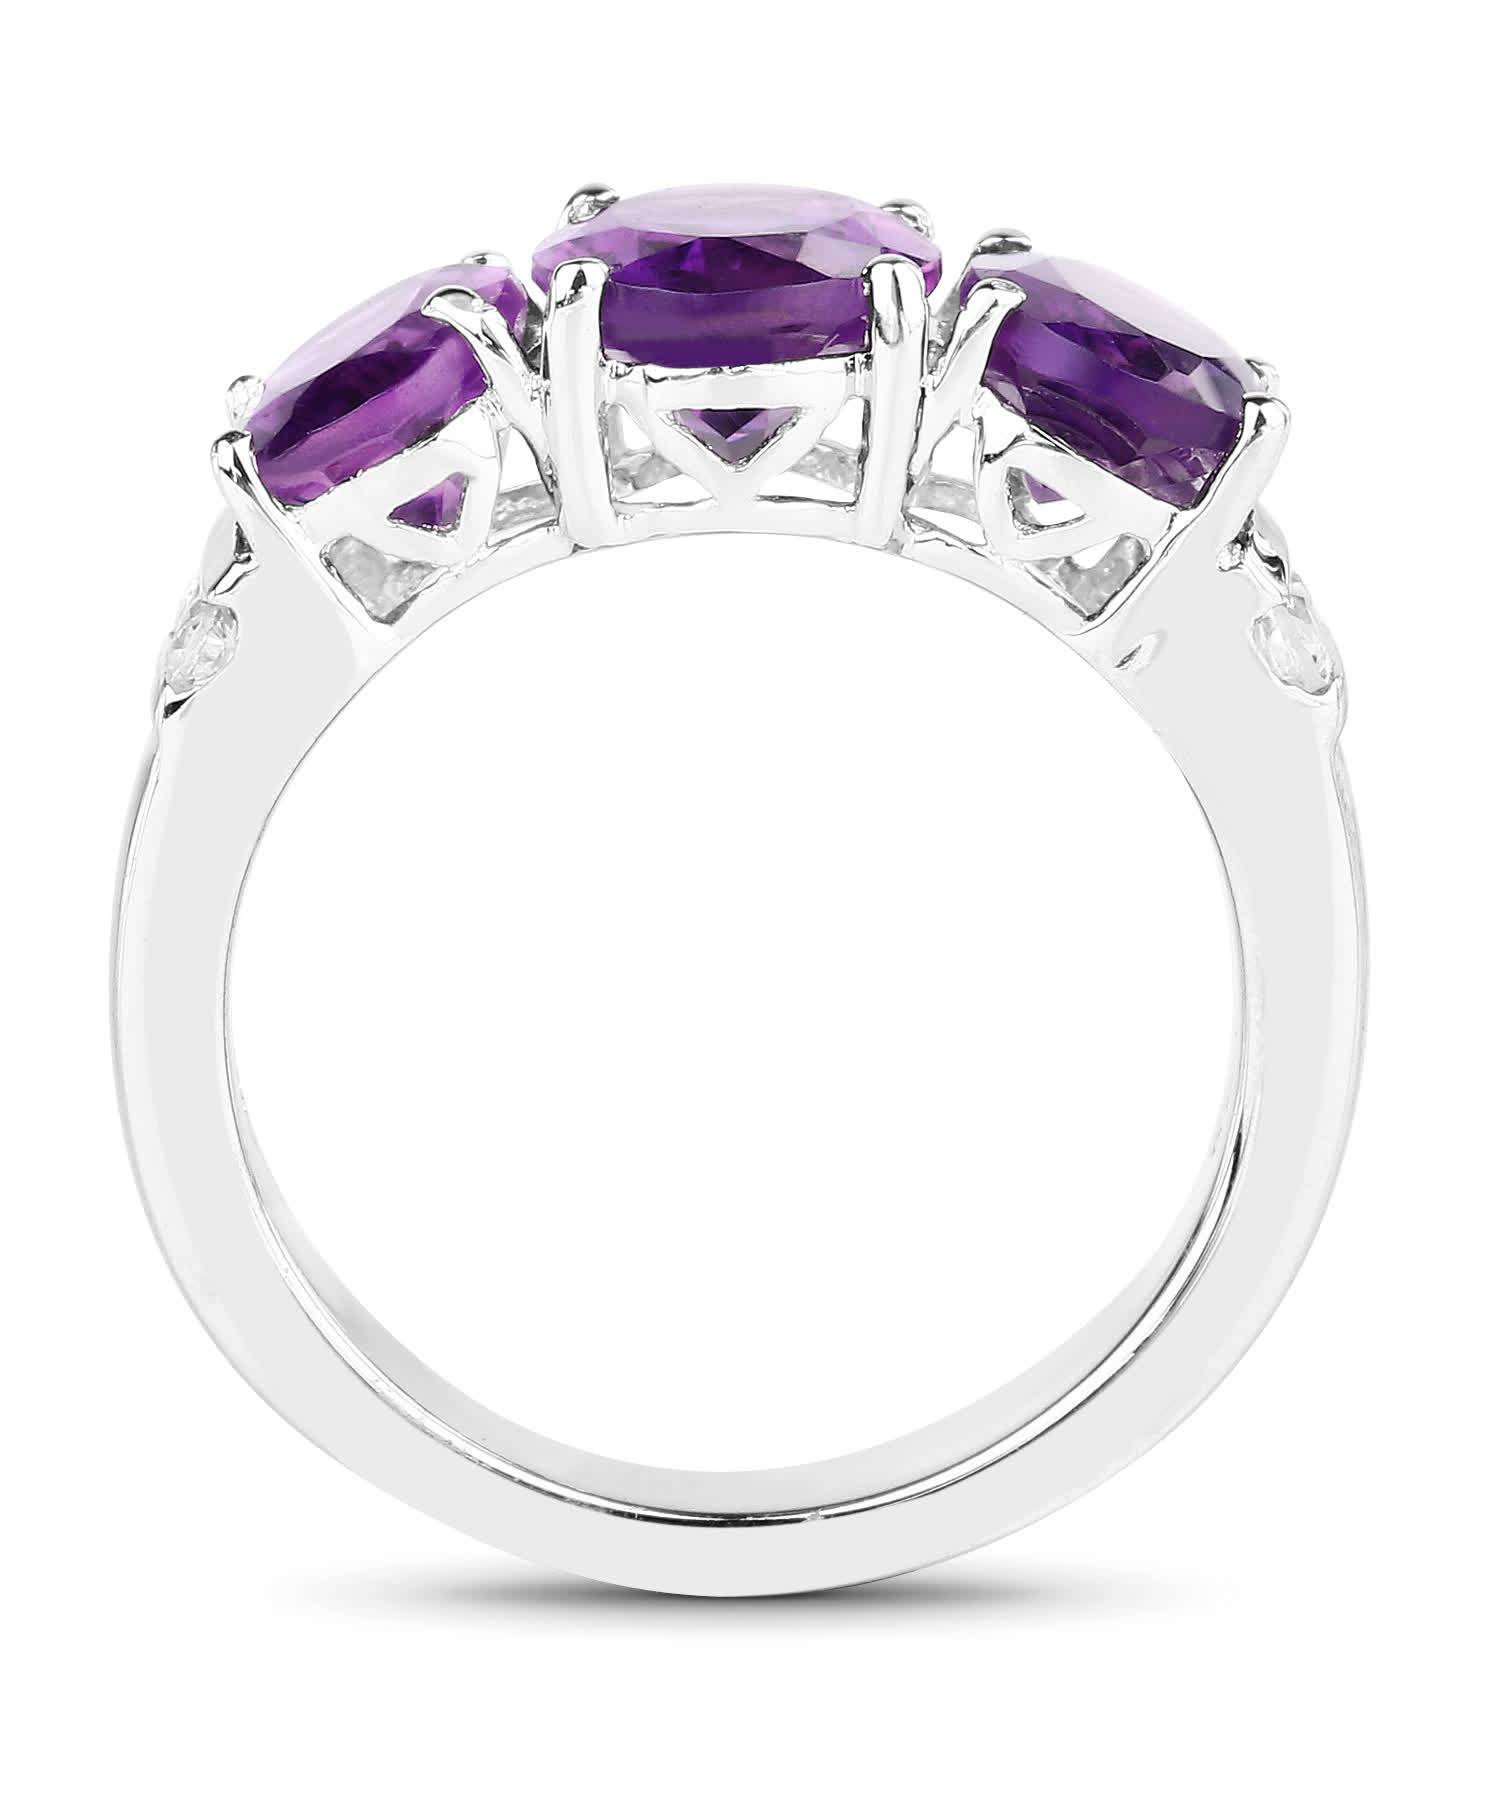 4.14ctw Natural Amethyst and Topaz Rhodium Plated 925 Sterling Silver Three-Stone Three-Stone Ring View 2